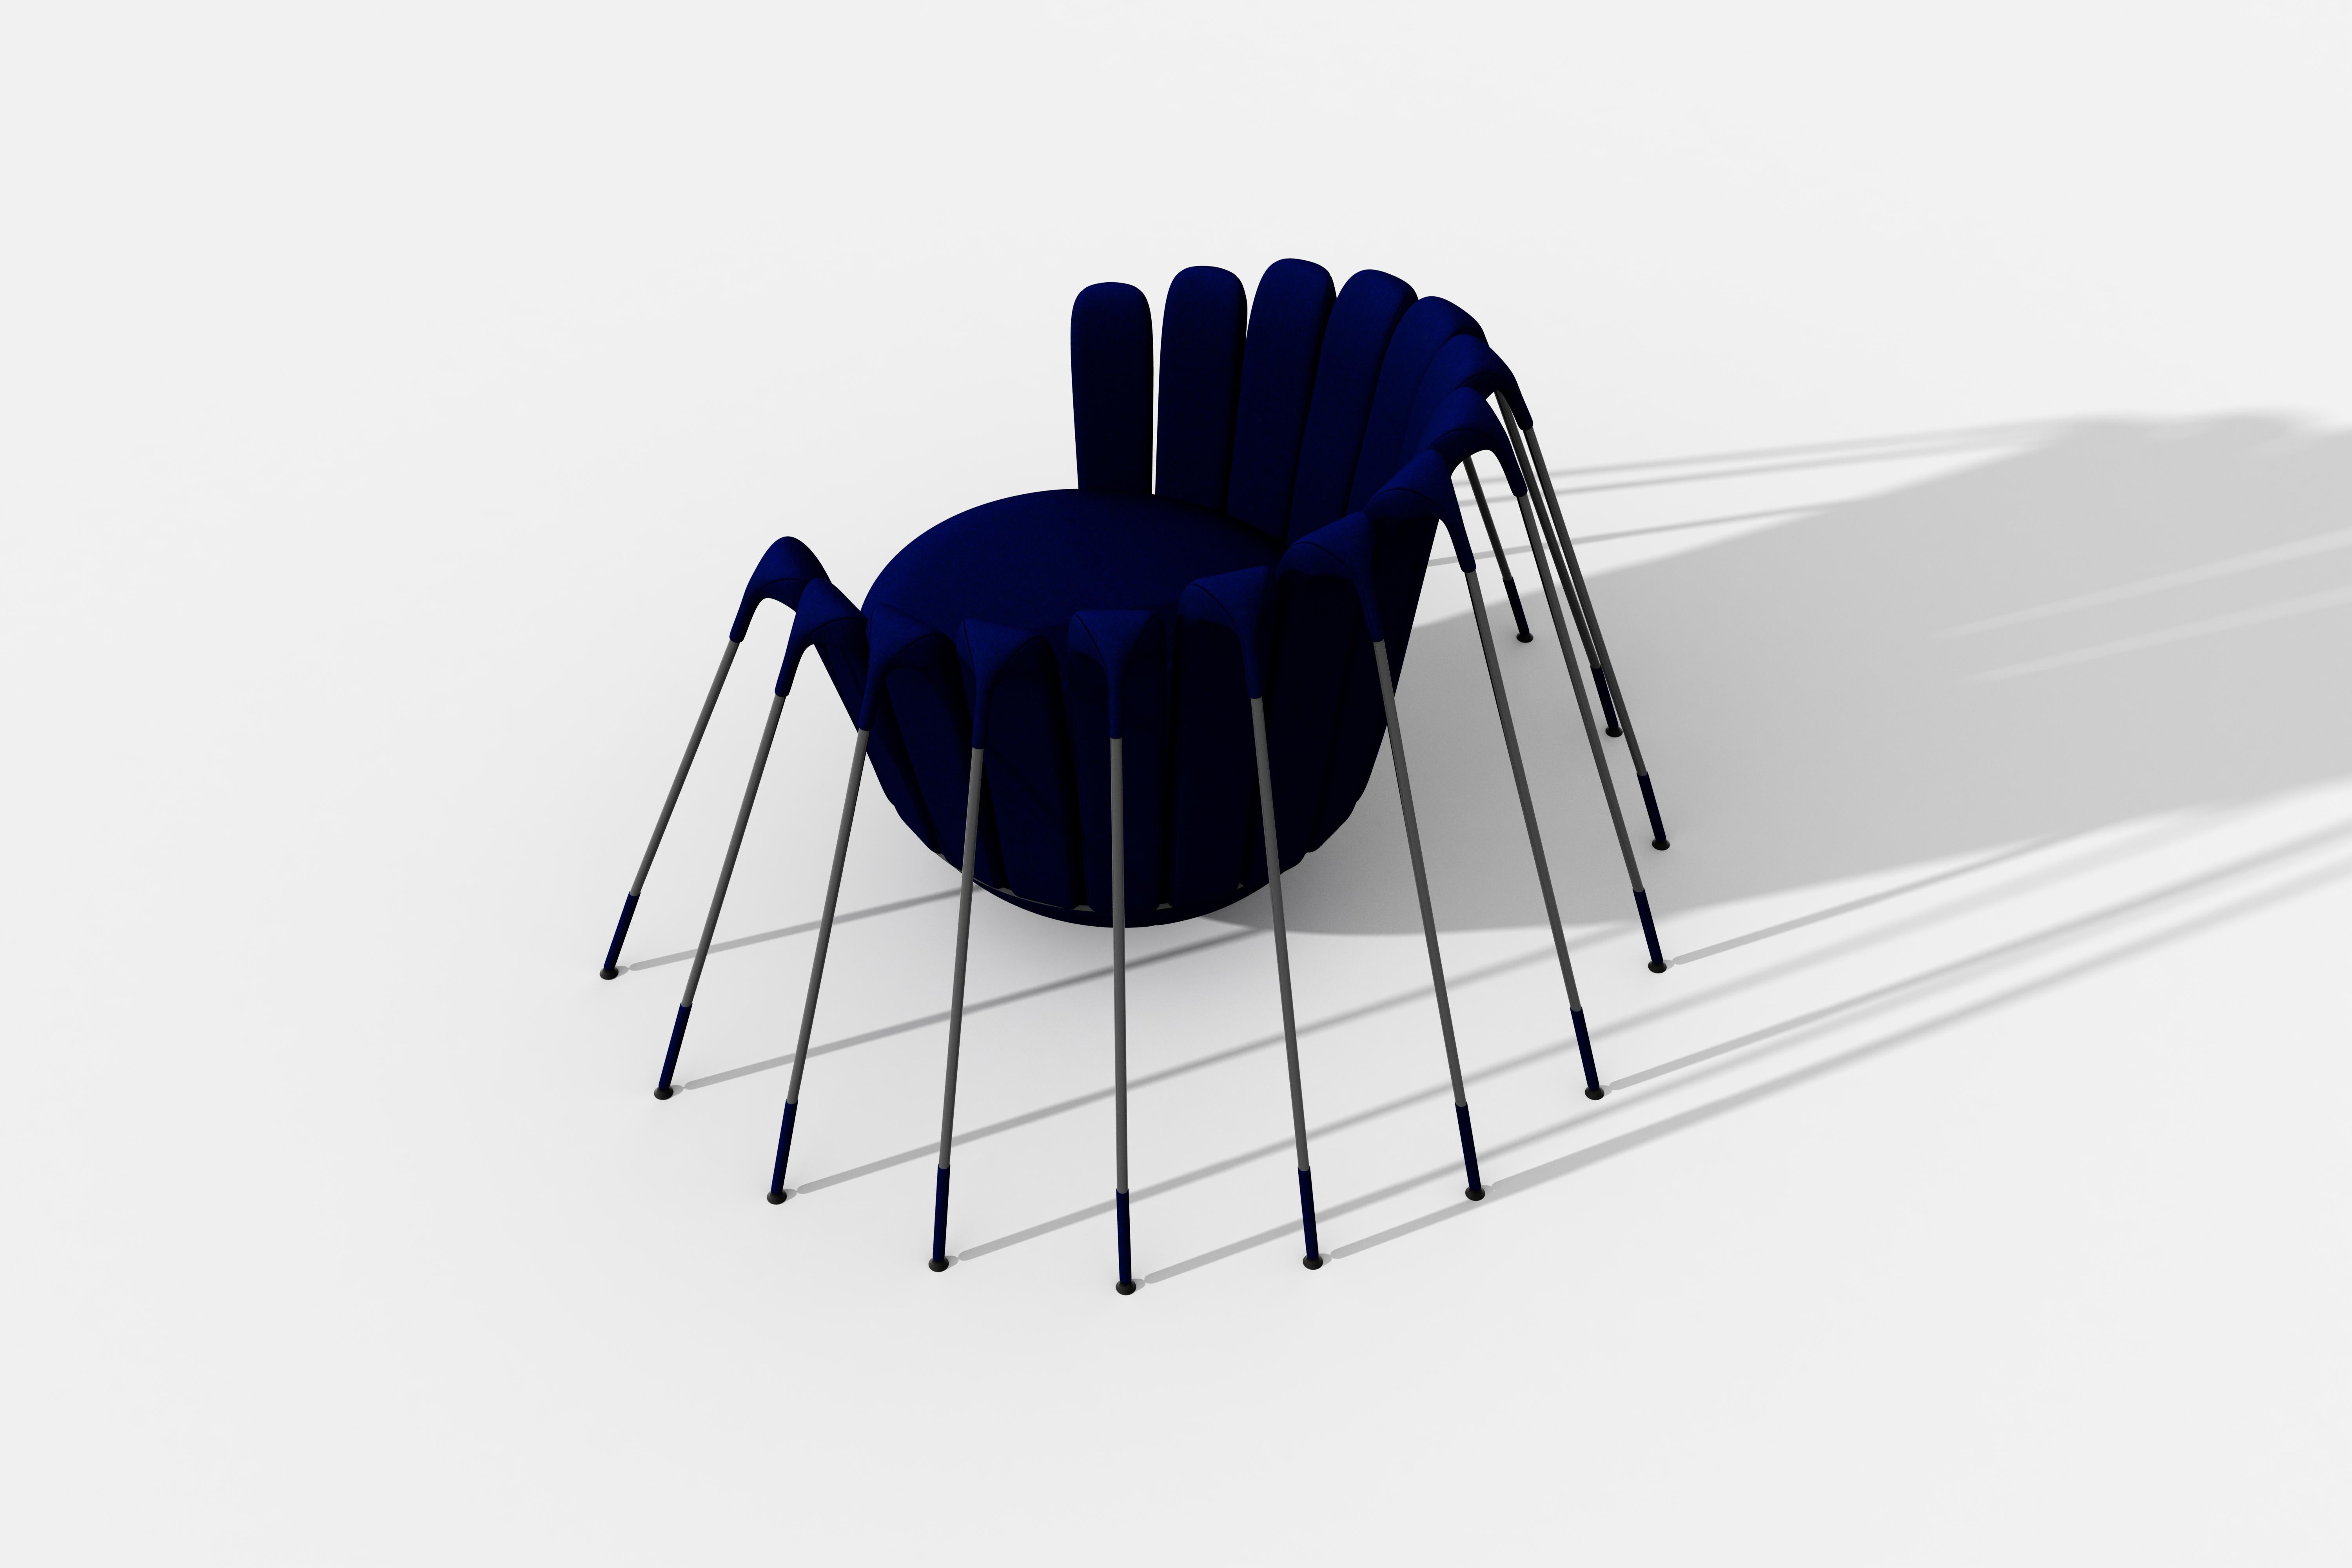 Les Araigneés armchair is upholstered with blue velvet and placed on a hemispherical base, which is suspended by a multitude of high gloss black metal legs.

In the vivid imagination of Parisian-Italian designer Marc Ange, “Les Araigneés drew